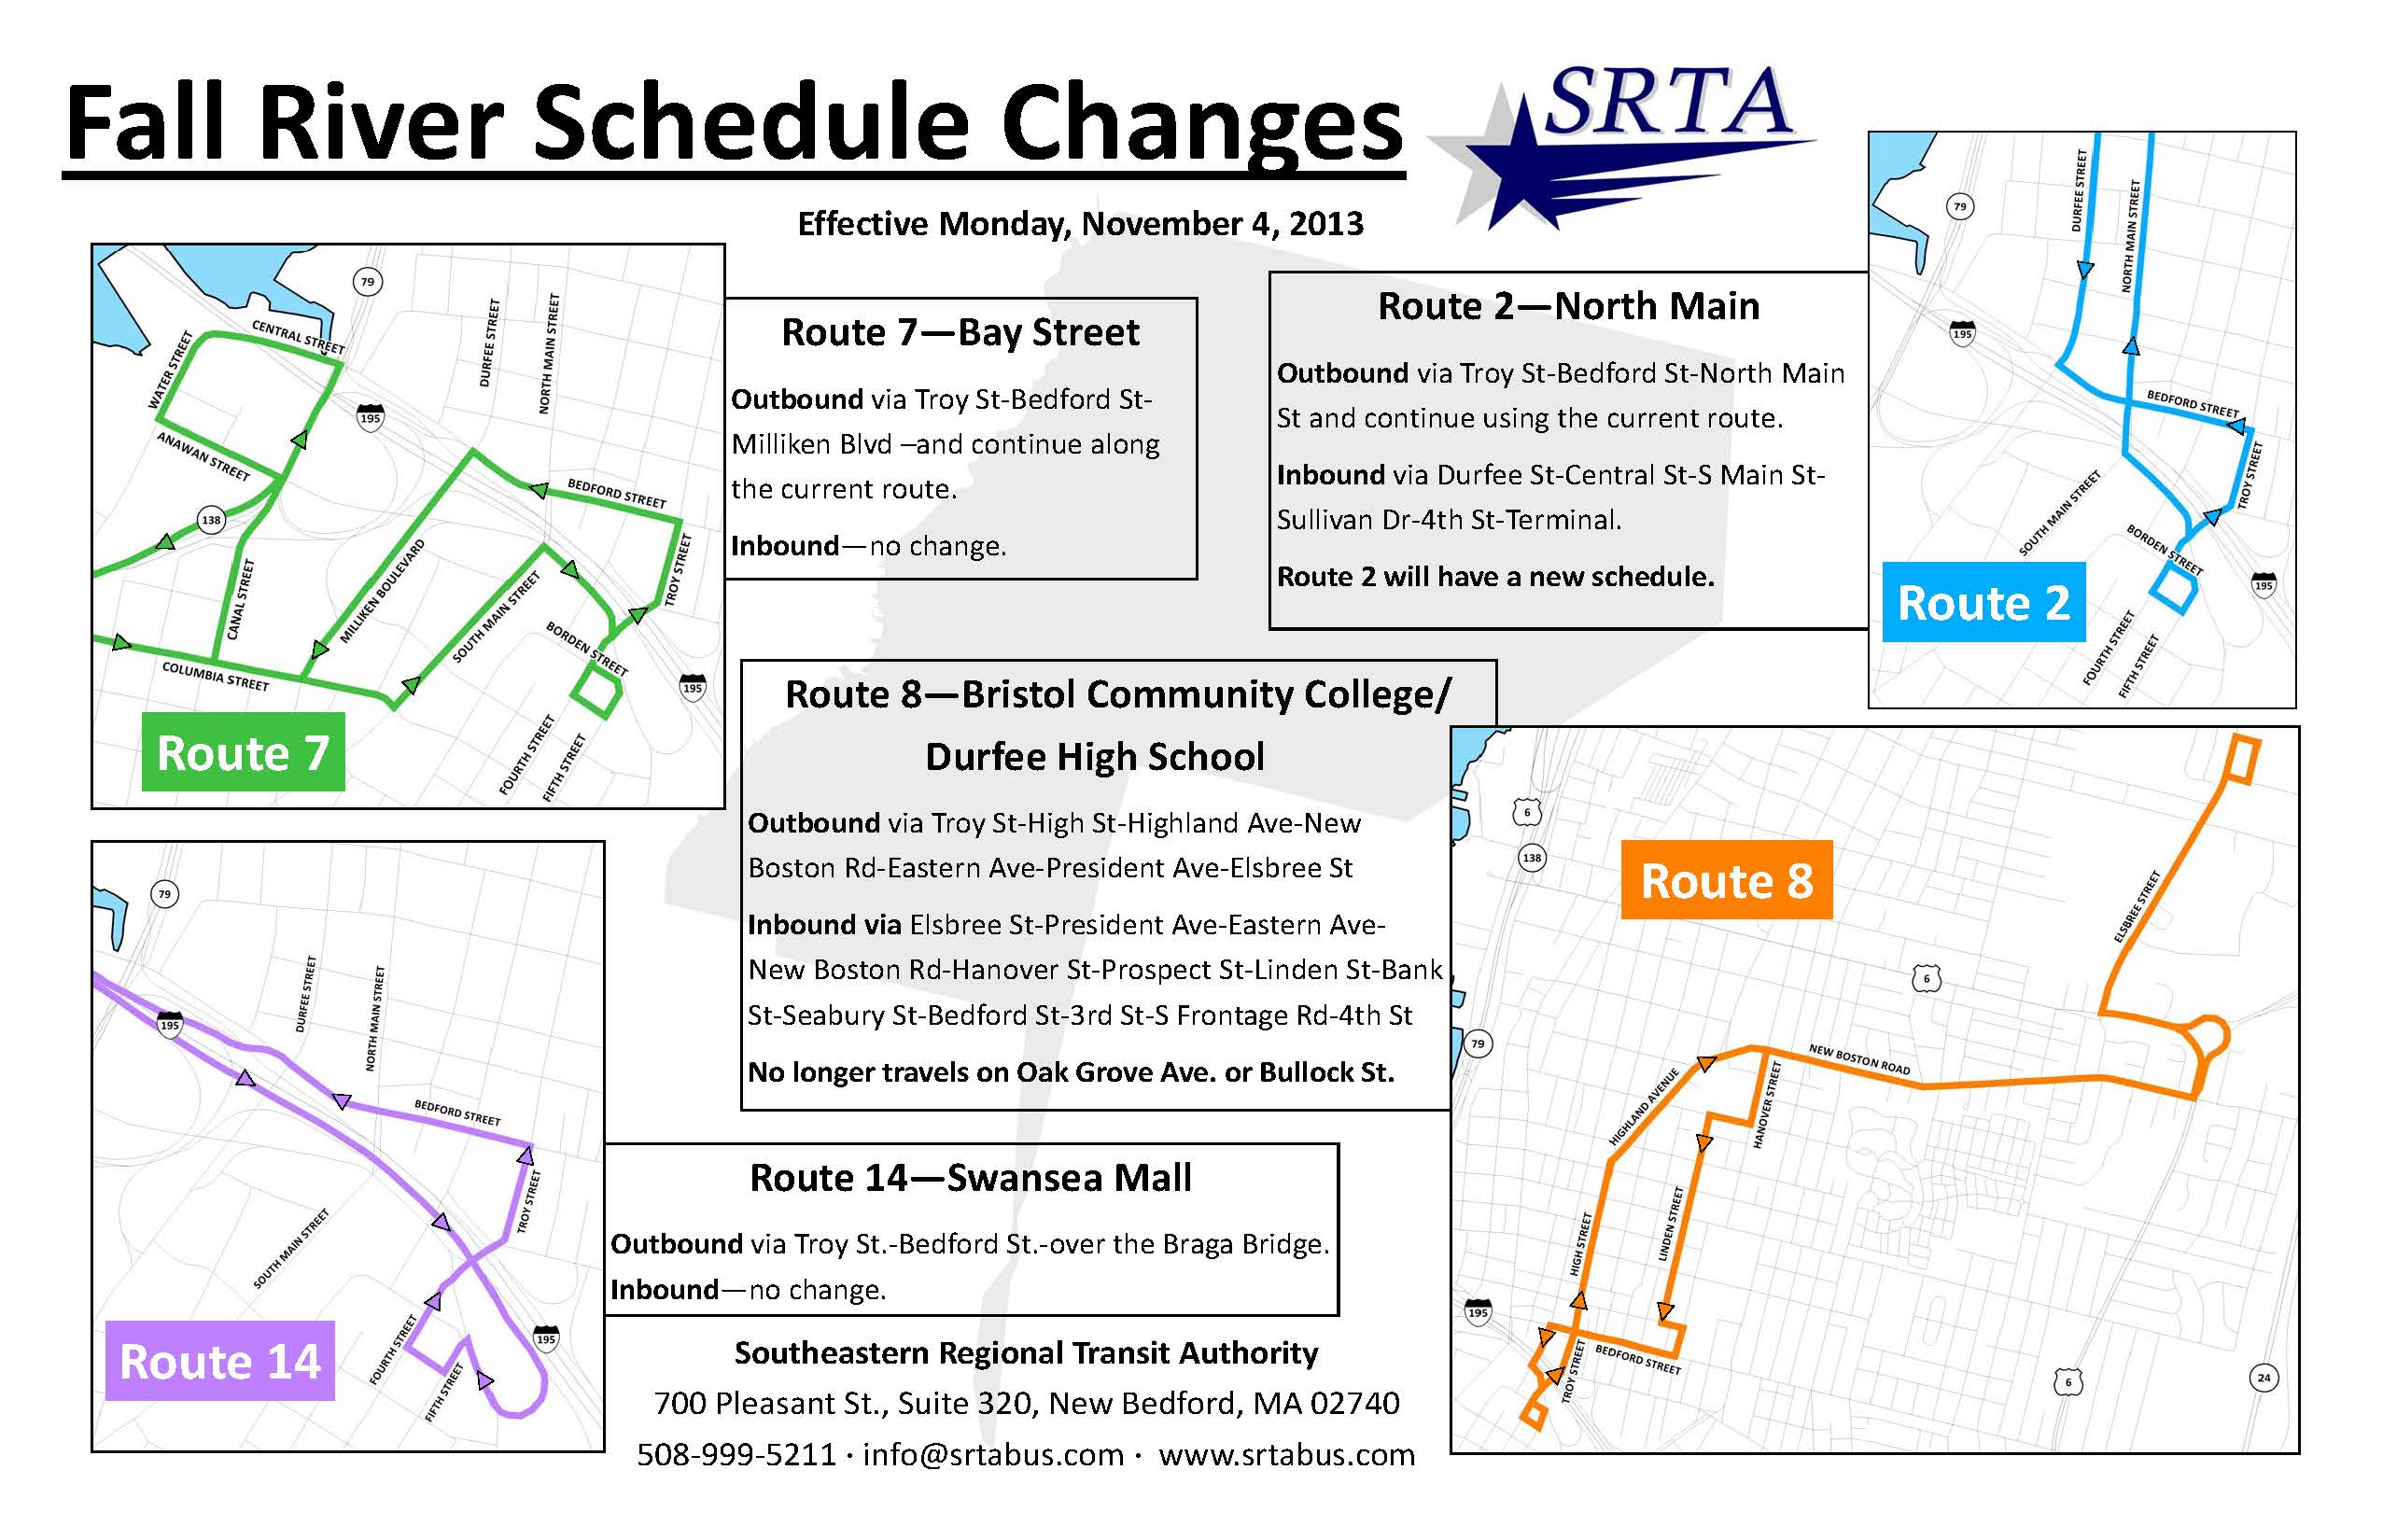 Nov 4 Schedule and Route Changes Fall River